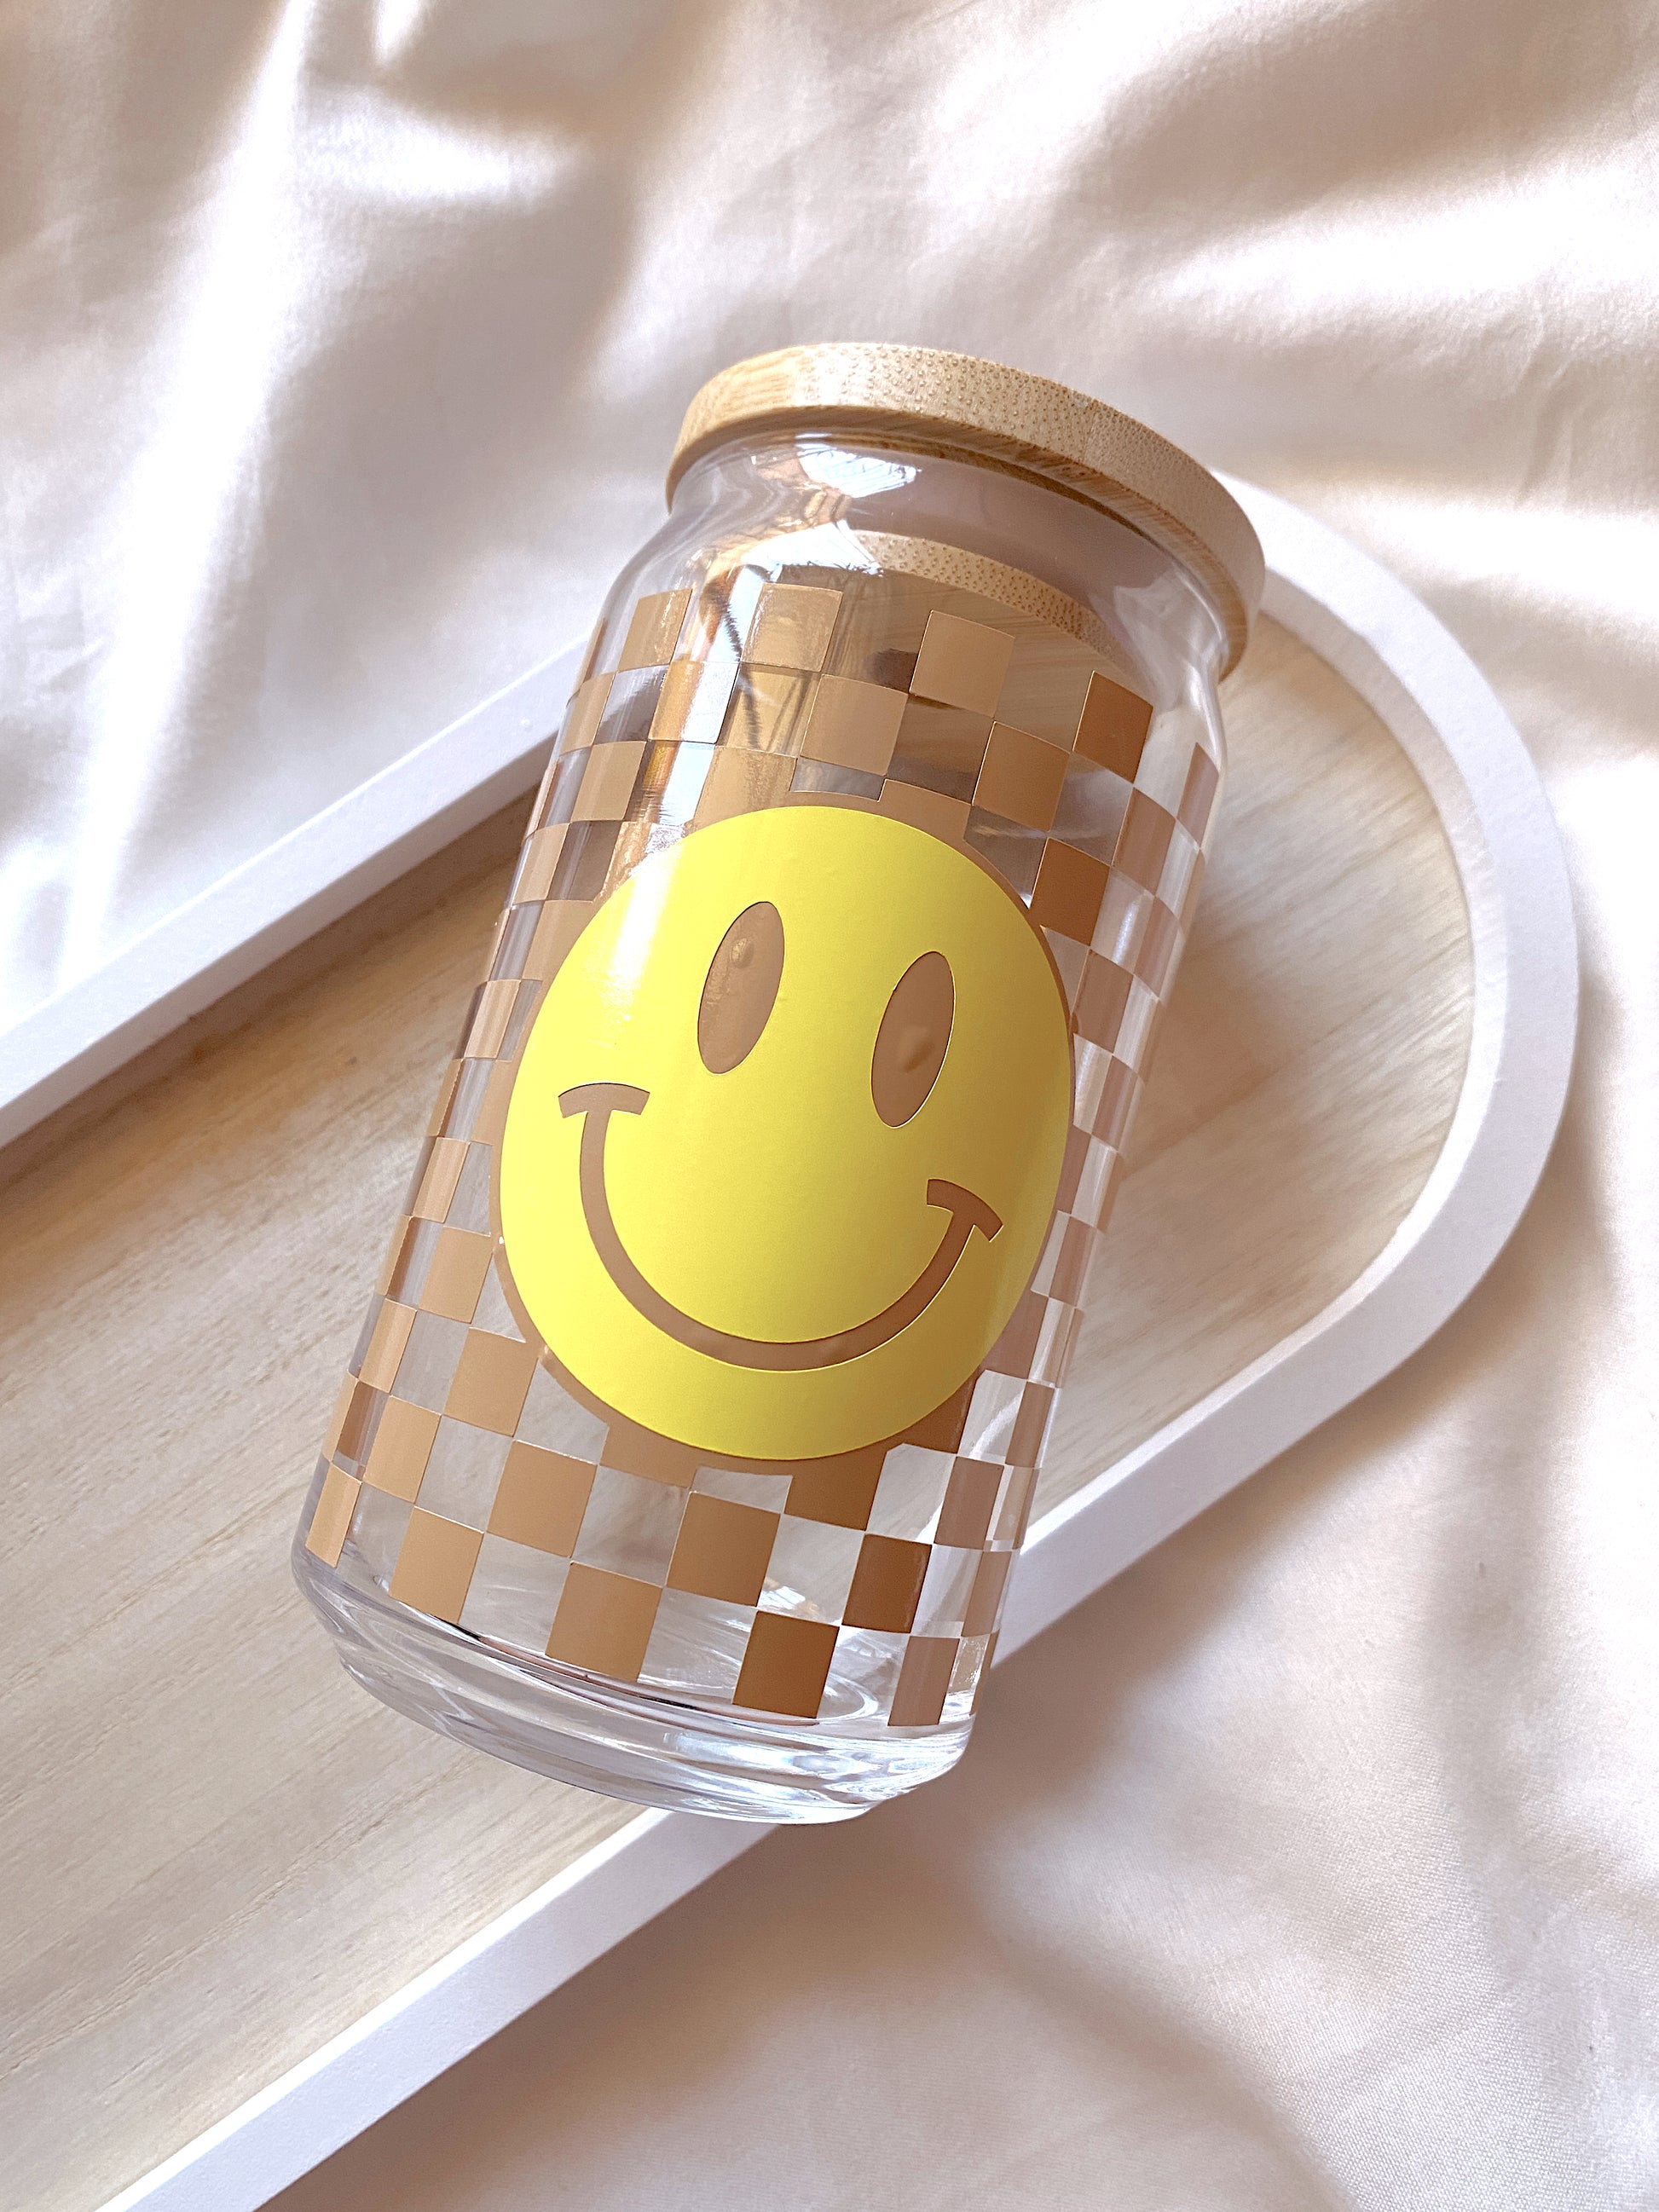 16 oz Smiley Glass Can Cup